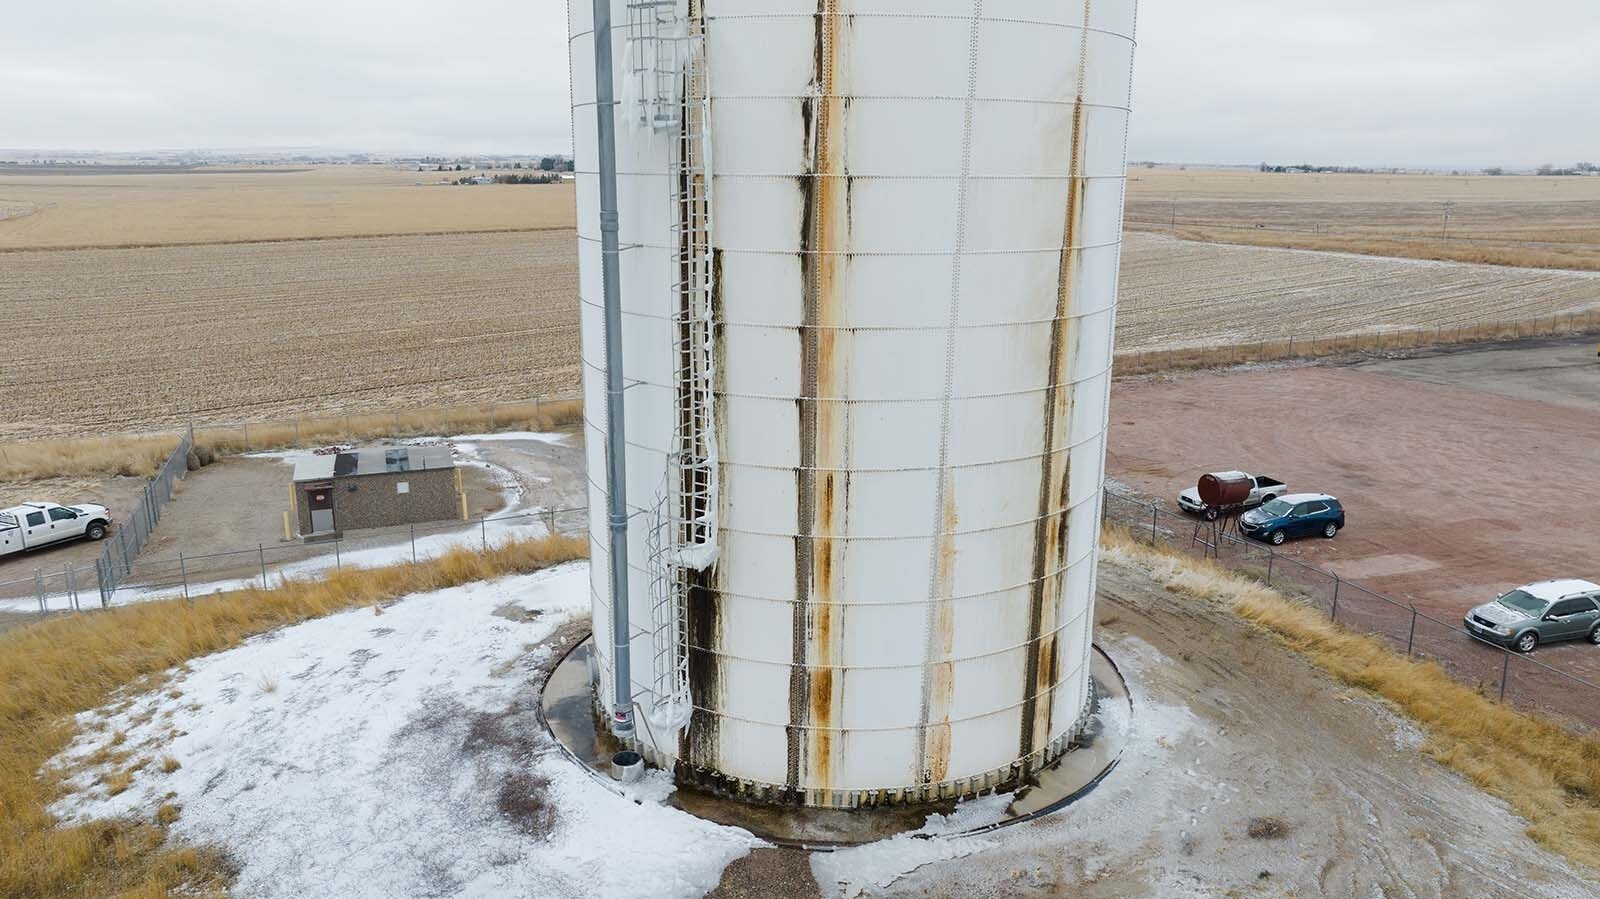 Although this water tower built in 2001 was supposed to have a life expectancy of 50 years, it's badly leaking and close to failing.